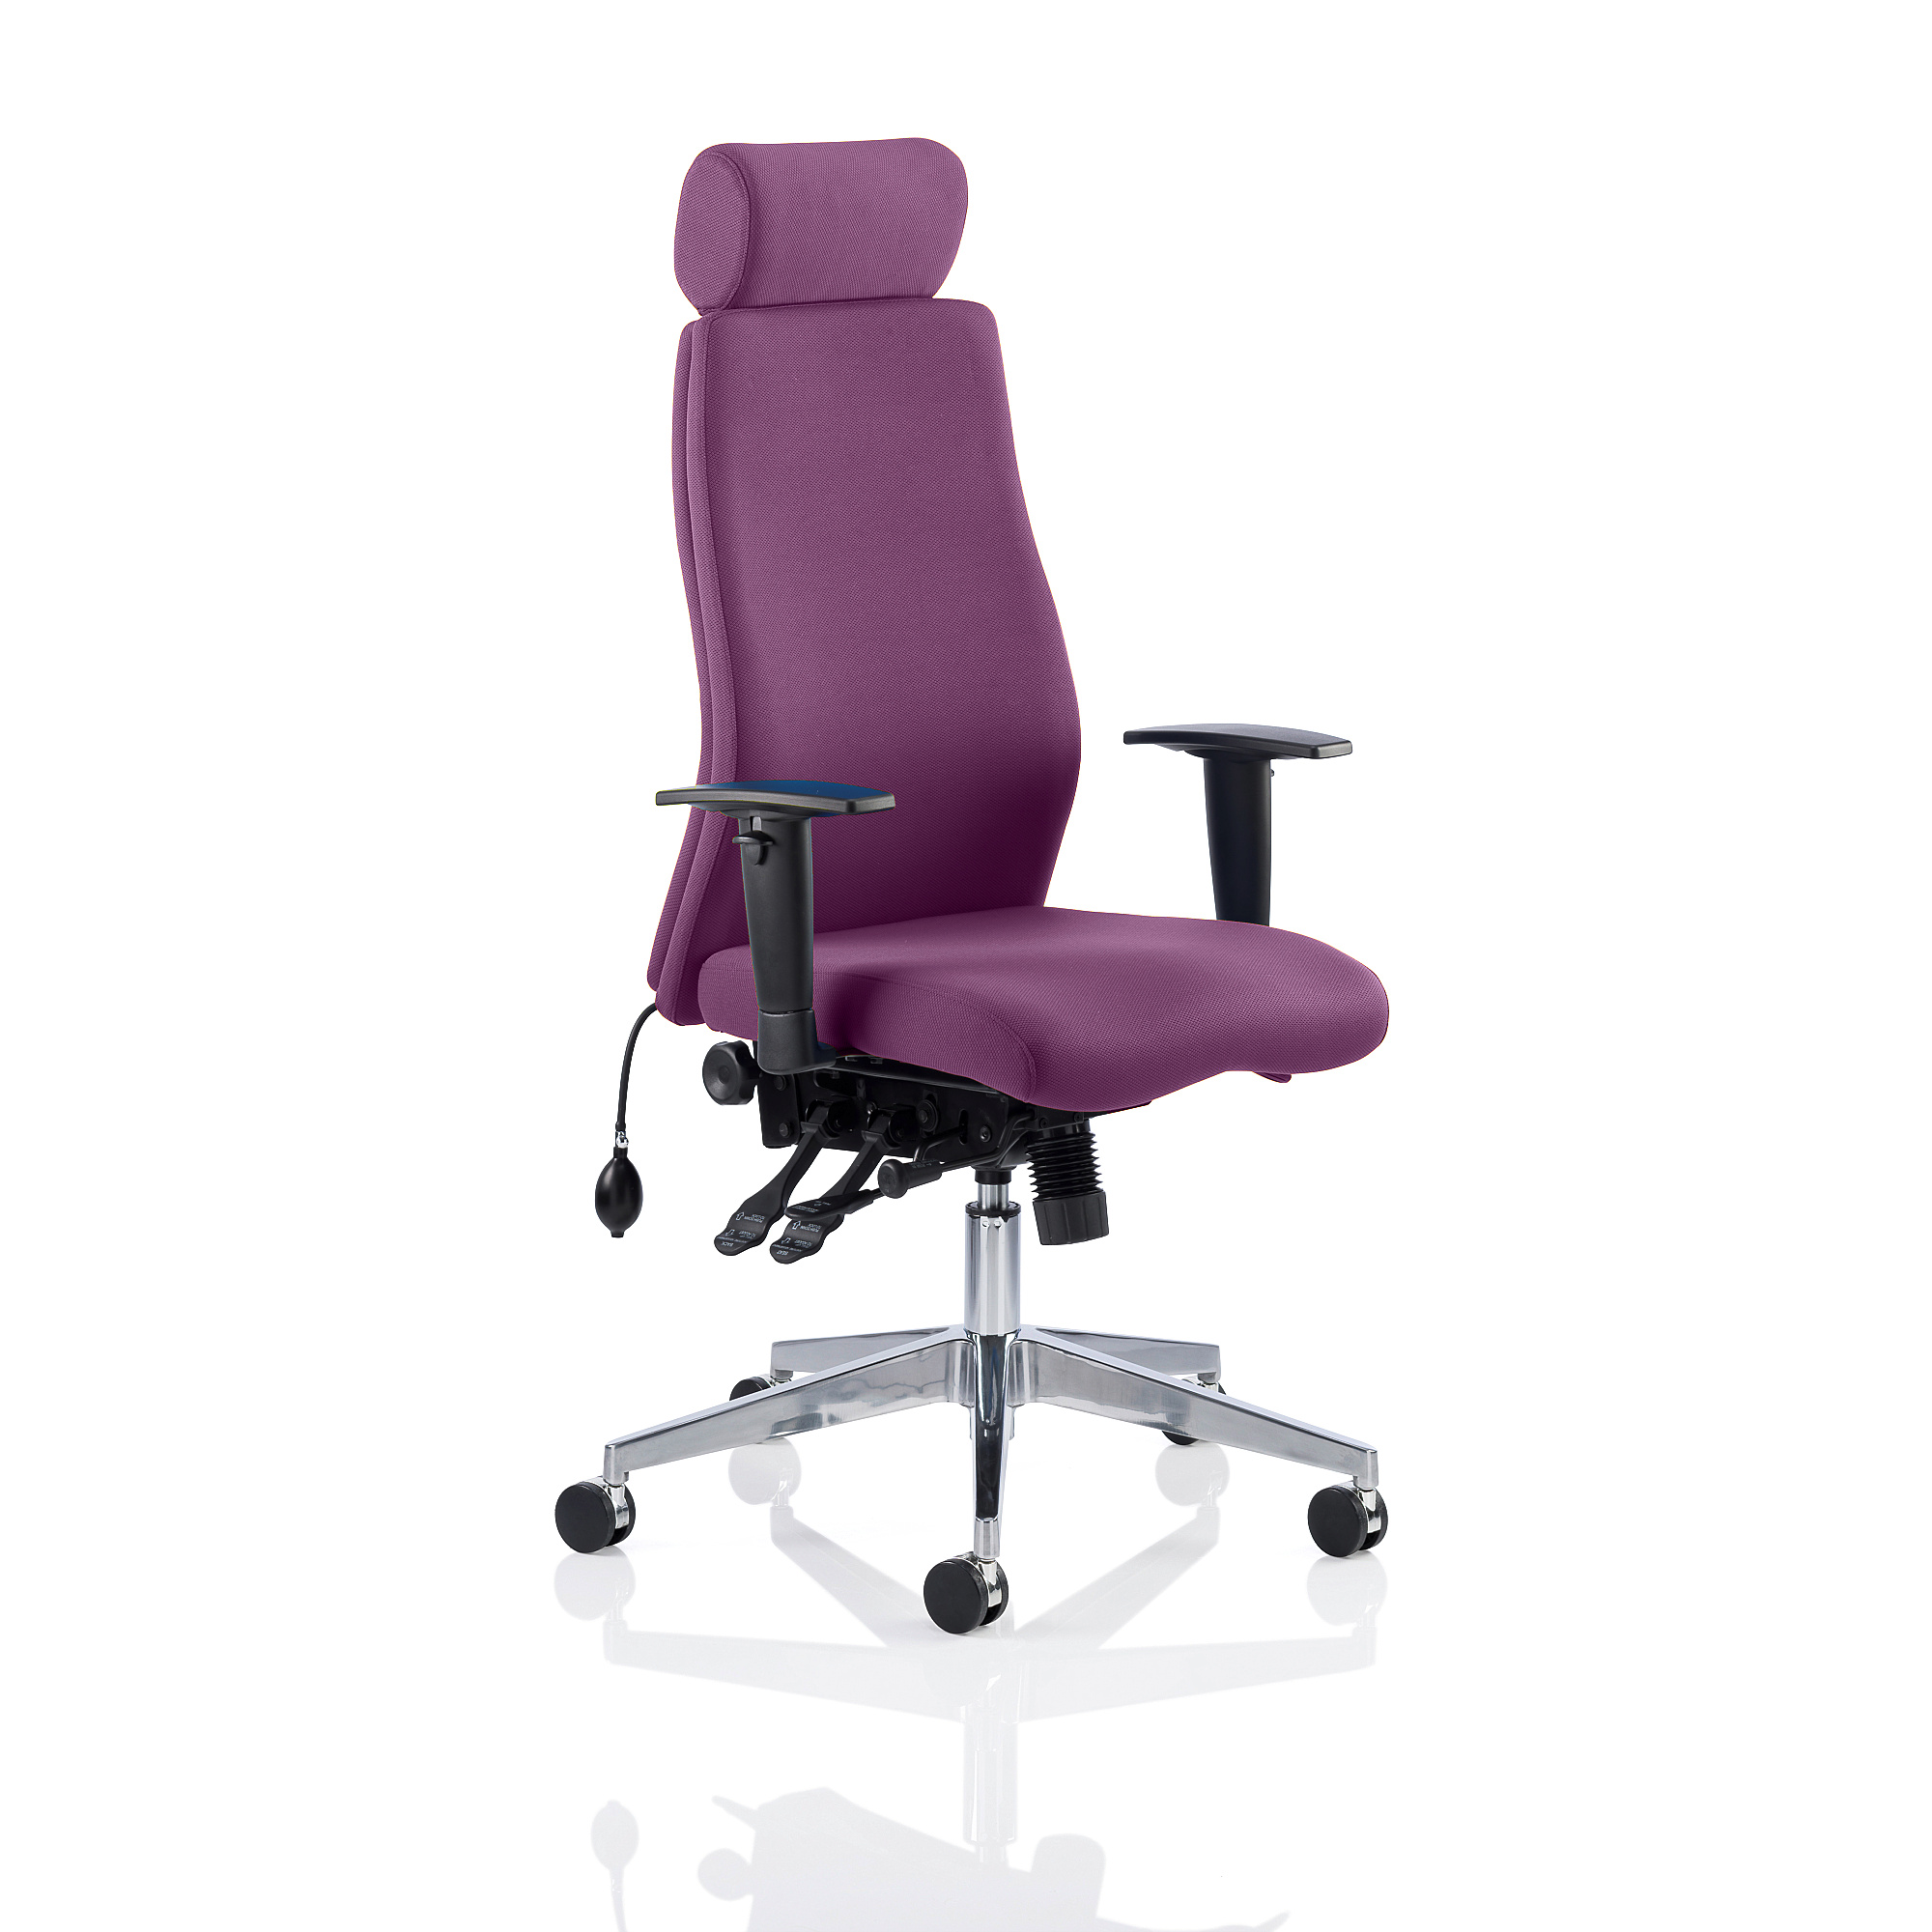 24 Hour Office Chair Arundel With, Desire 24hr Ergonomic Mesh Office Chair With Headrest